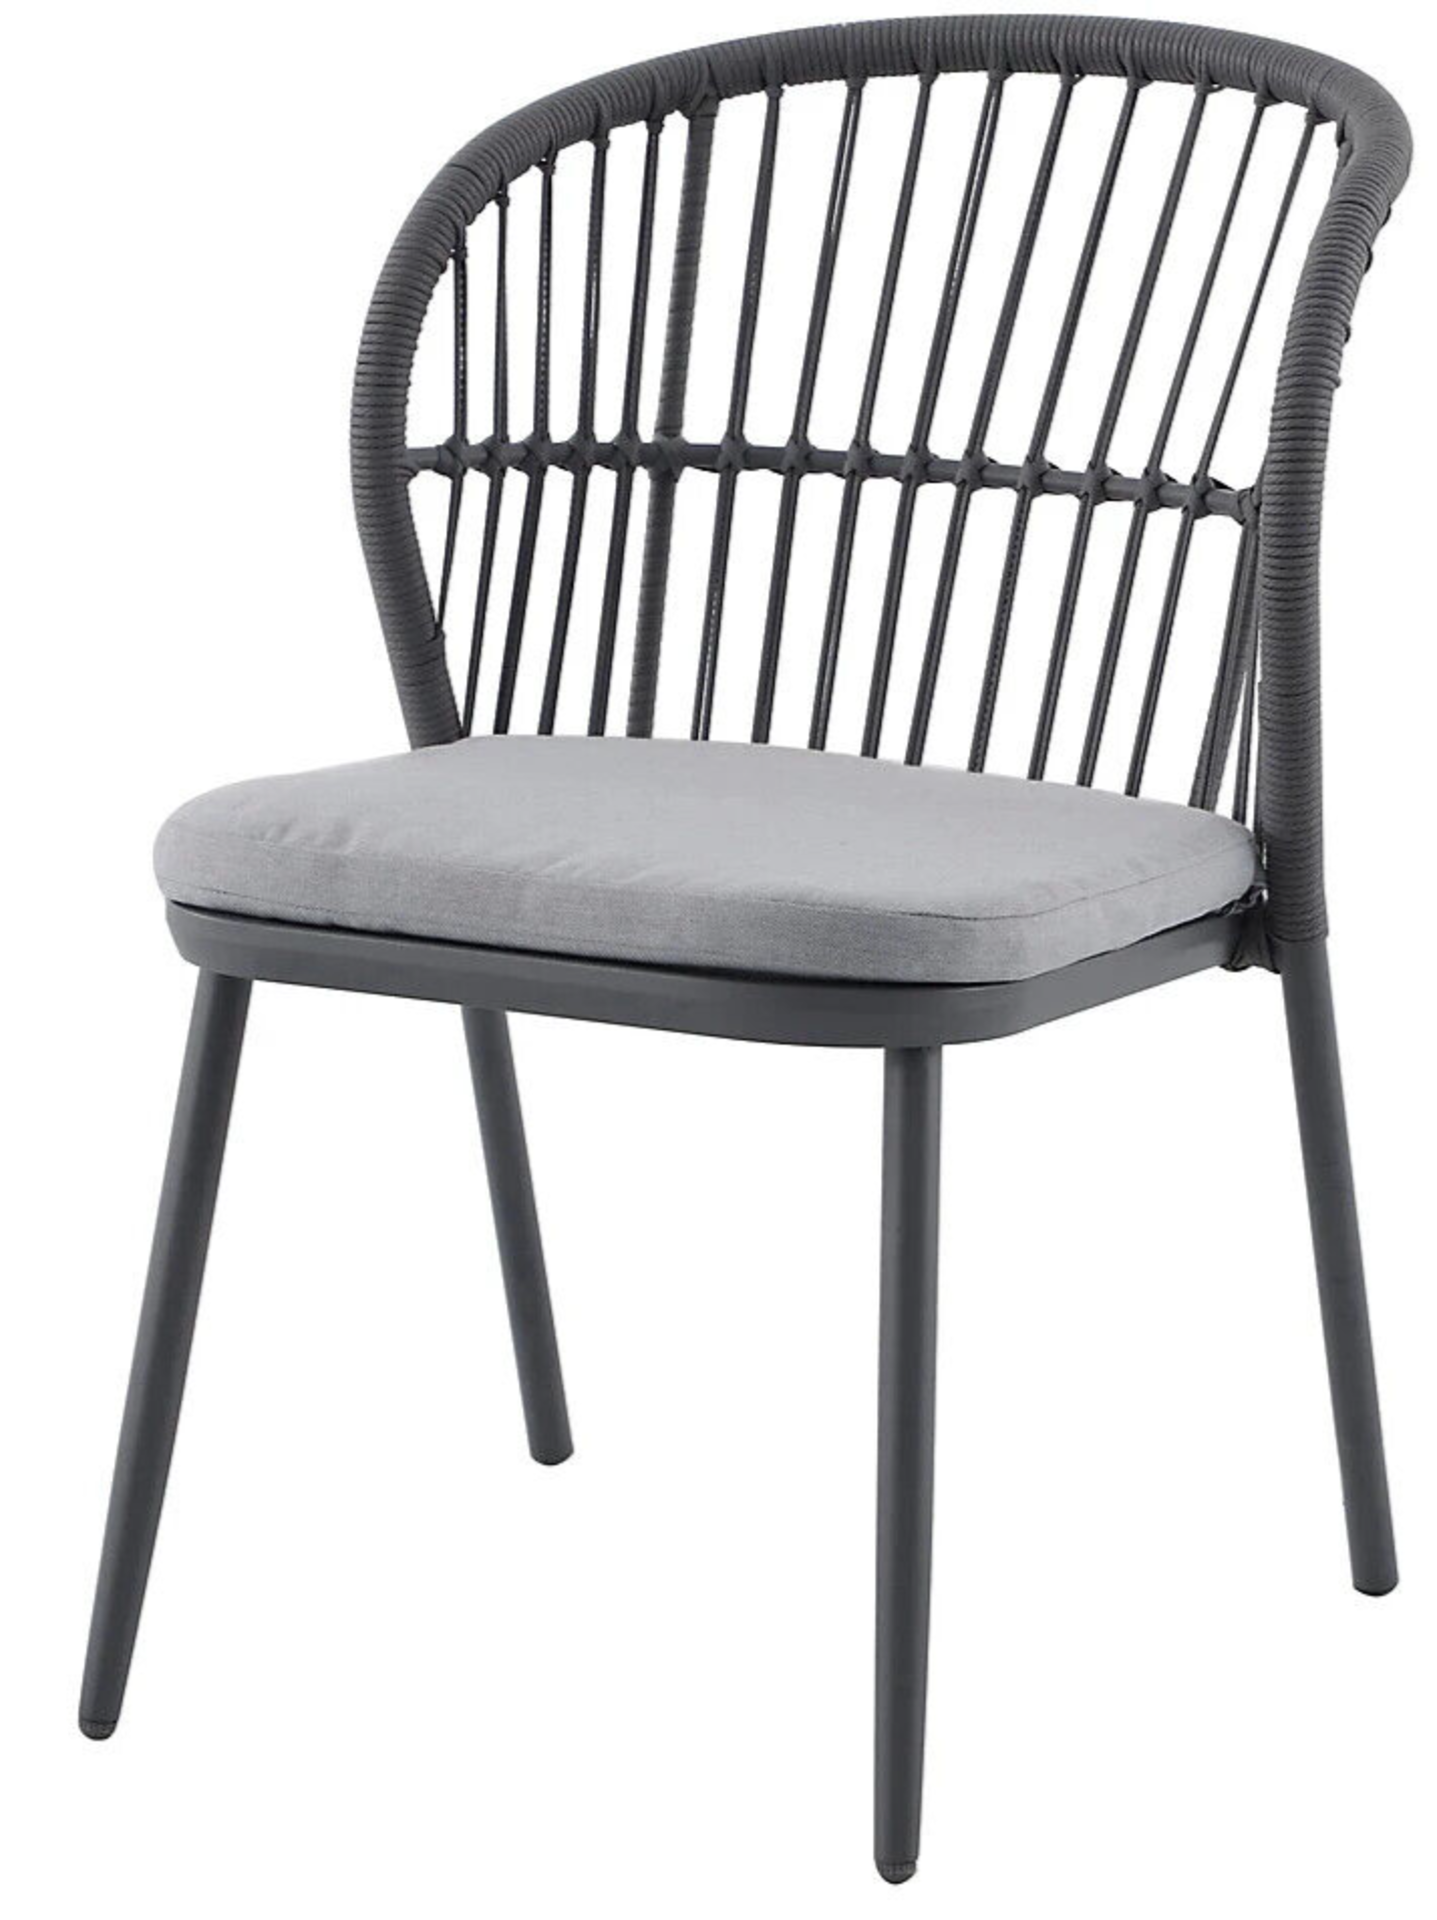 BRAND NEW SET OF 4 ROPE BISTRO CHAIR SETS R9B